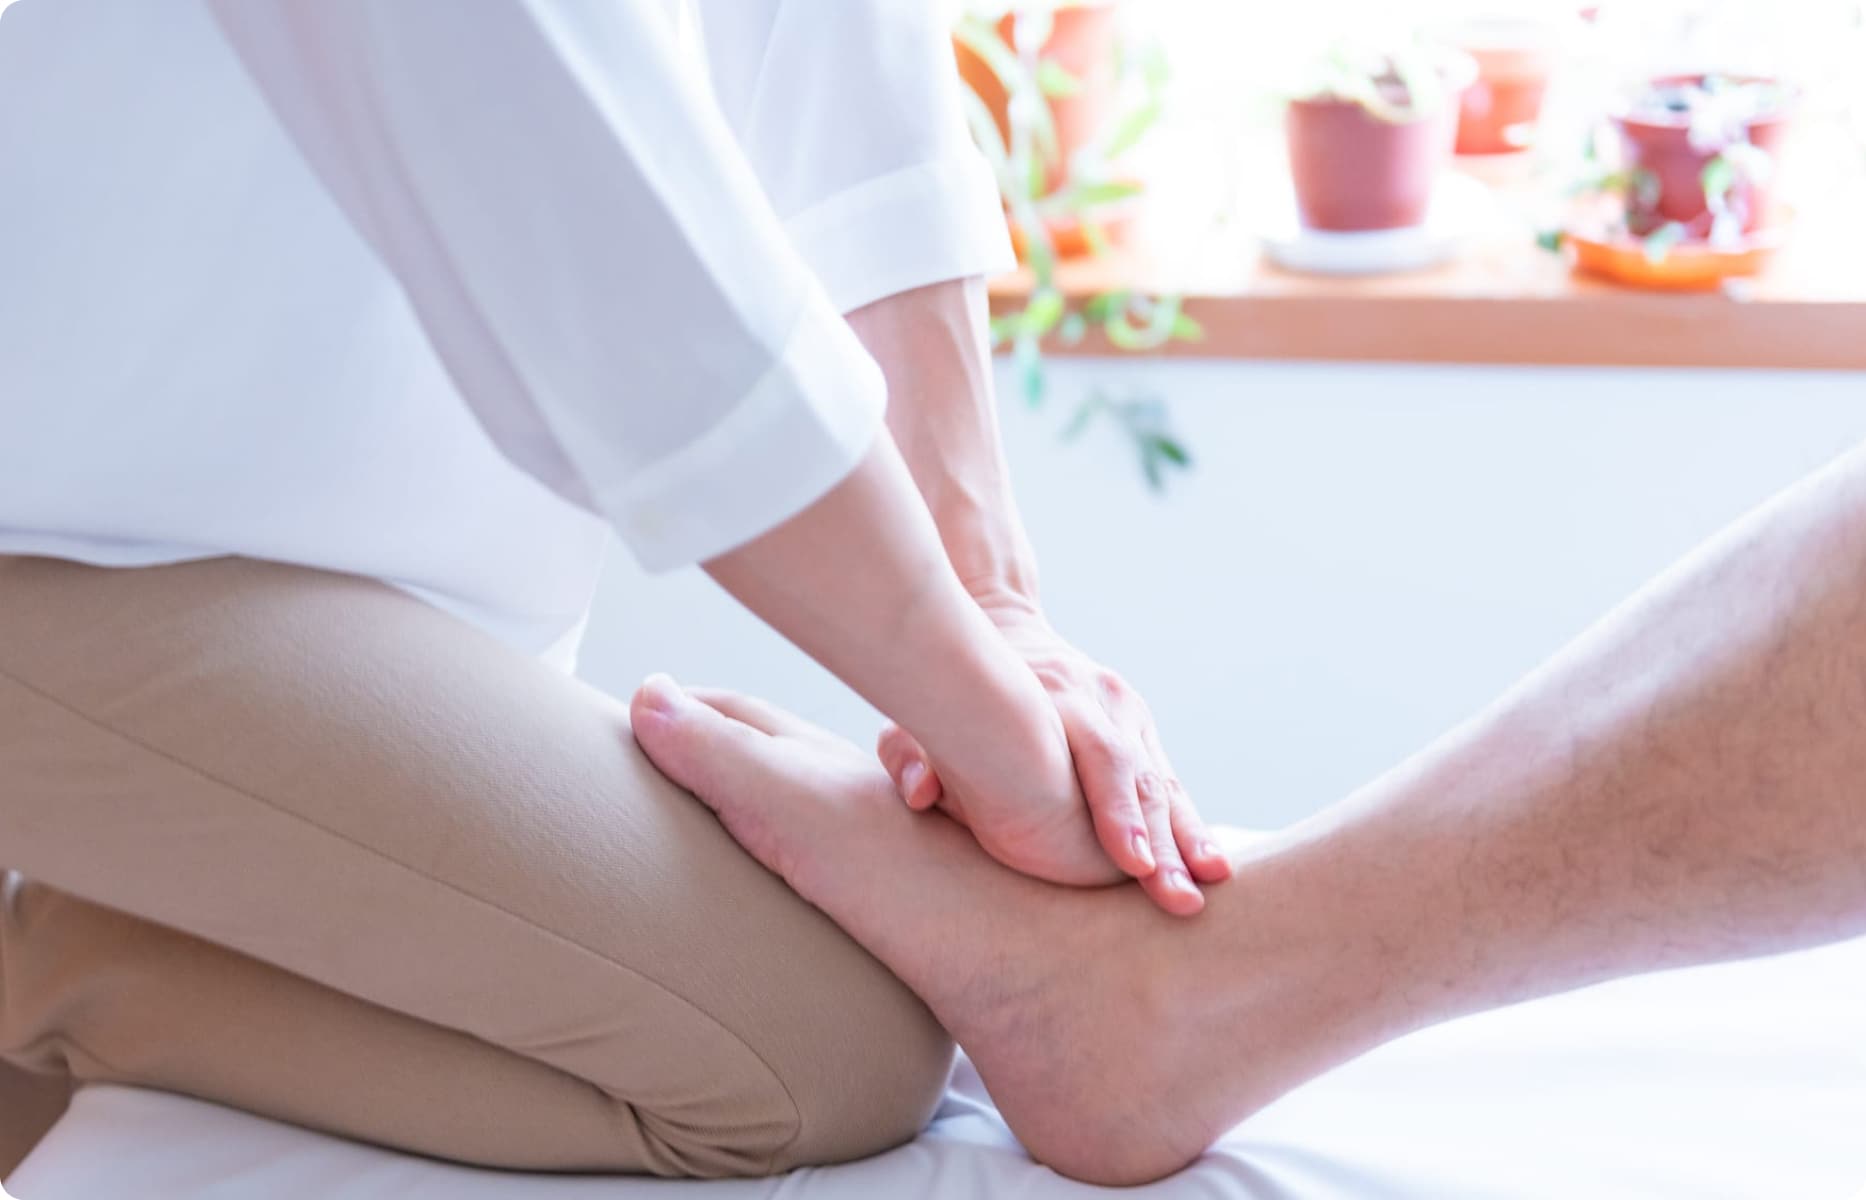 Osteopathic treatment of the toes